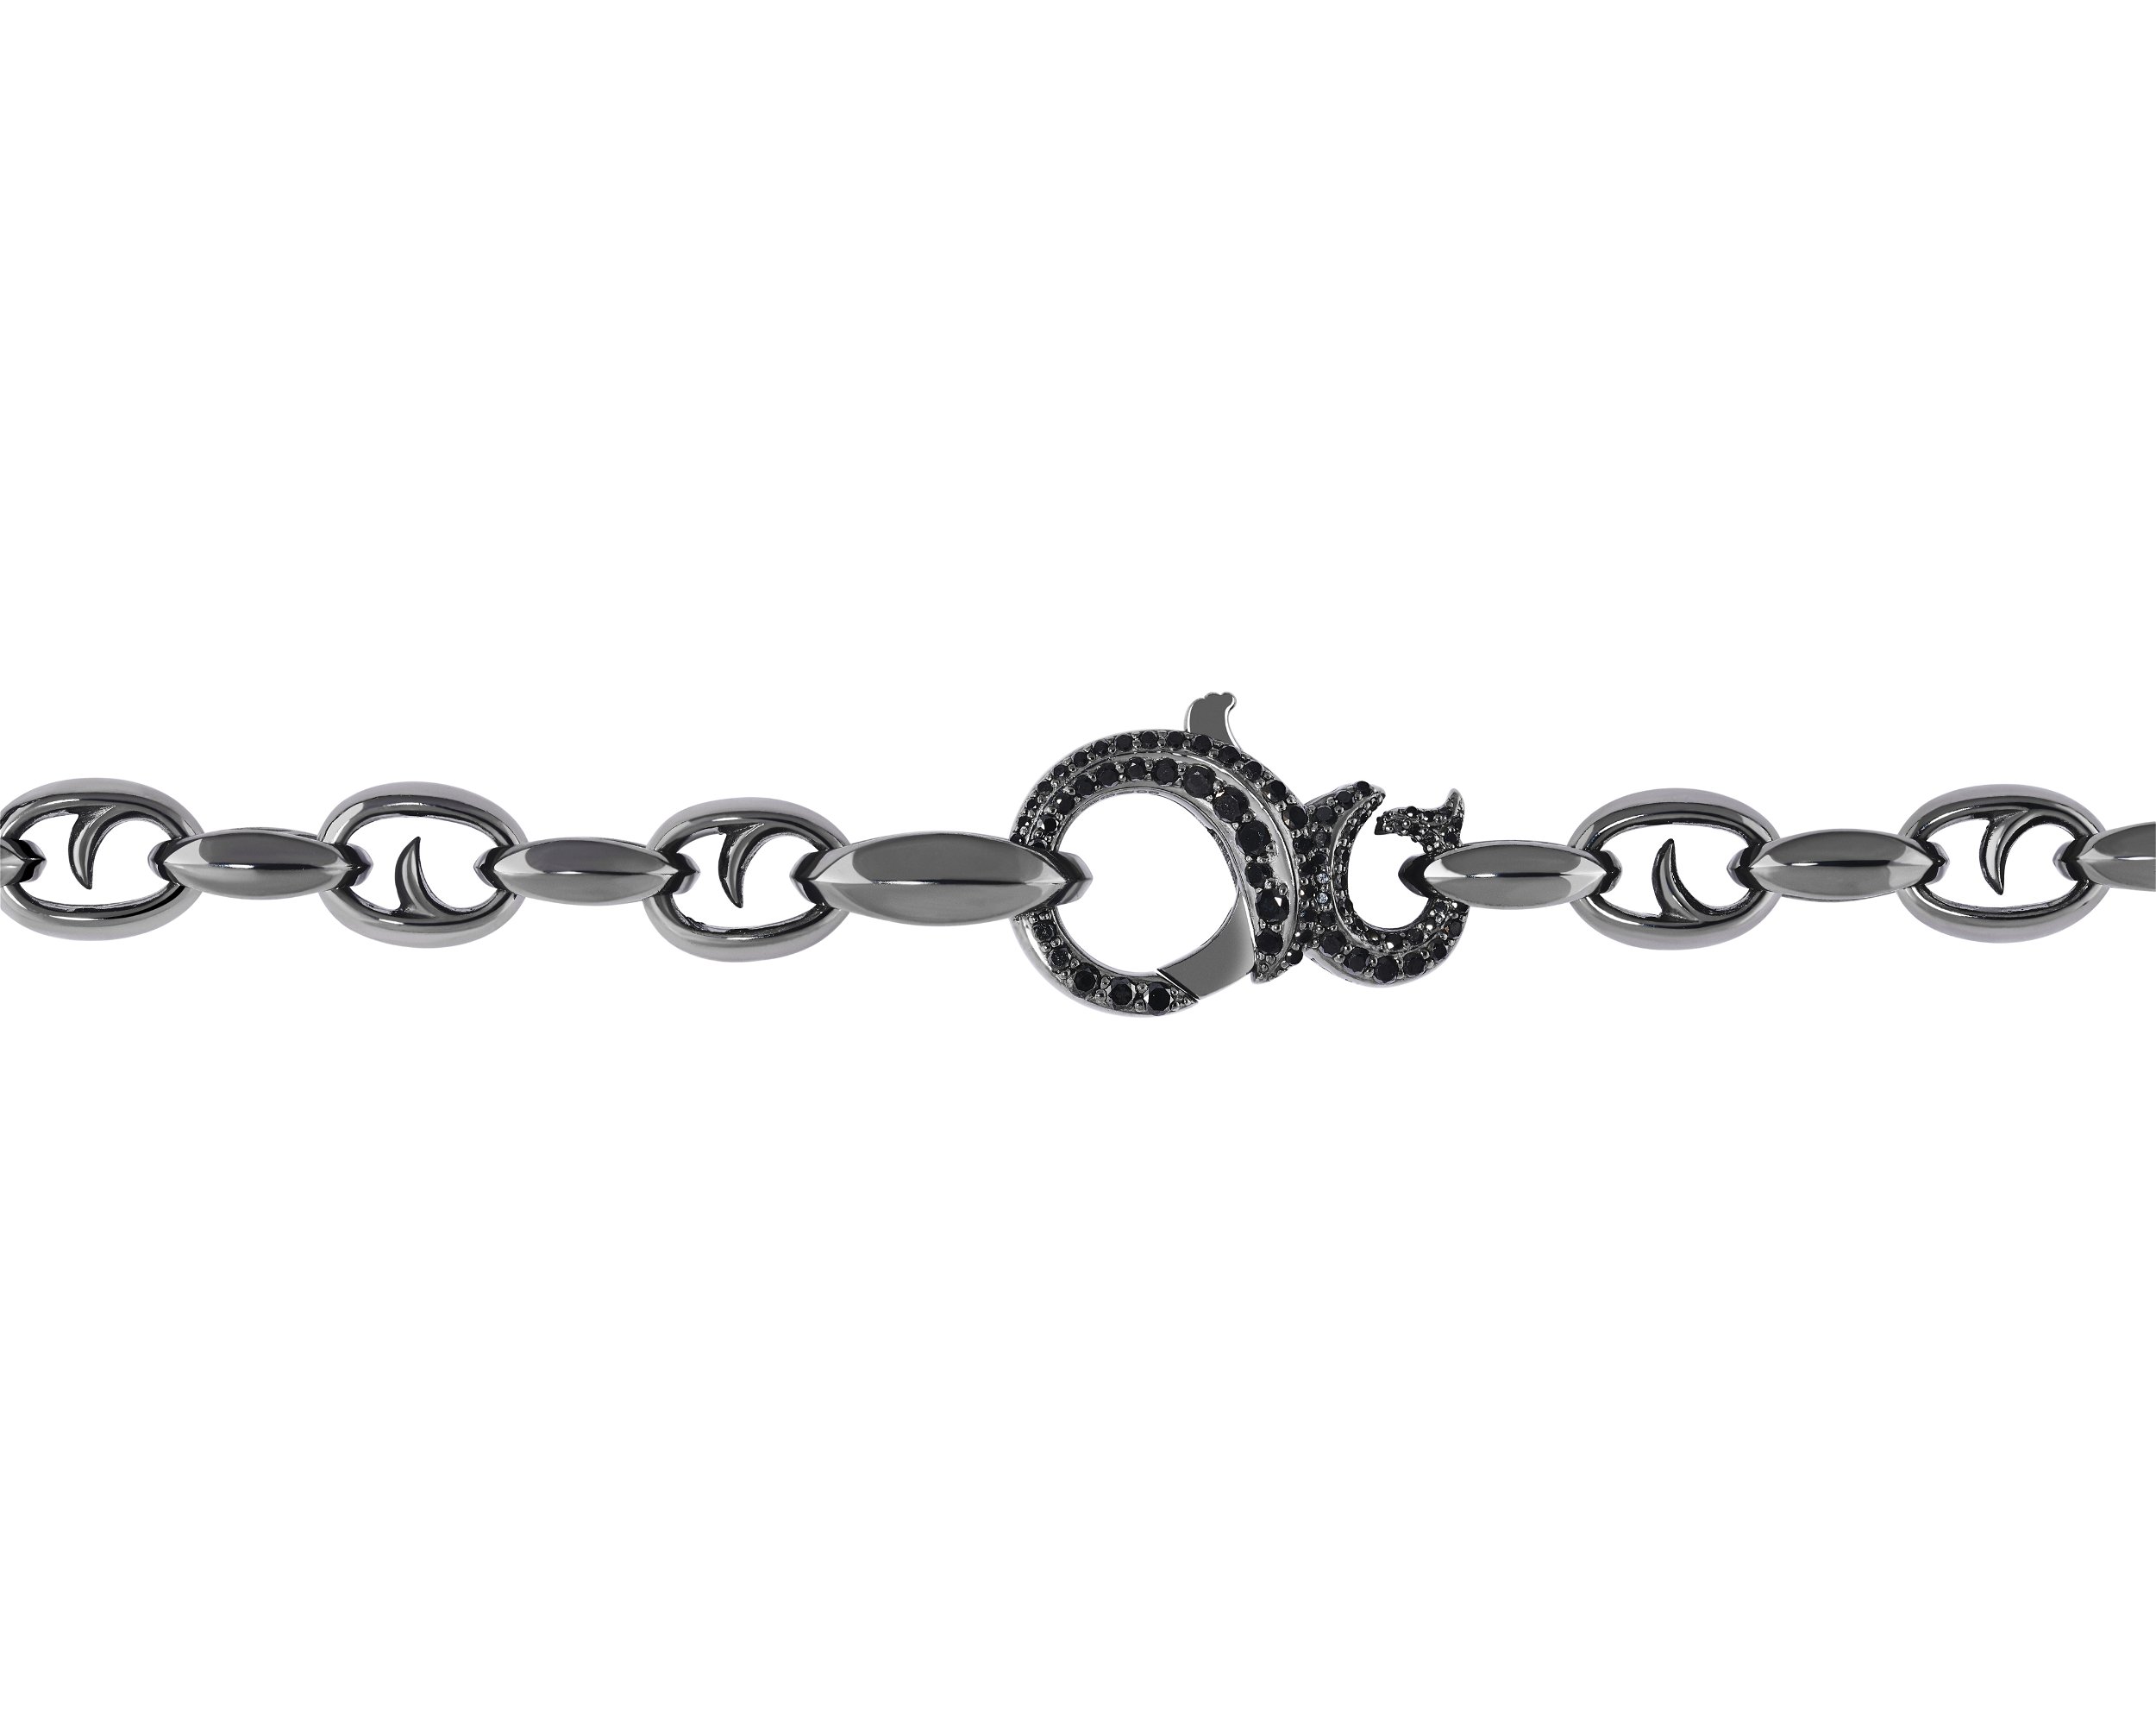 Thorn Addiction Classic Large Link Chain Necklace with Black Diamonds in Sterling Silver and Black Rhodium- 22"